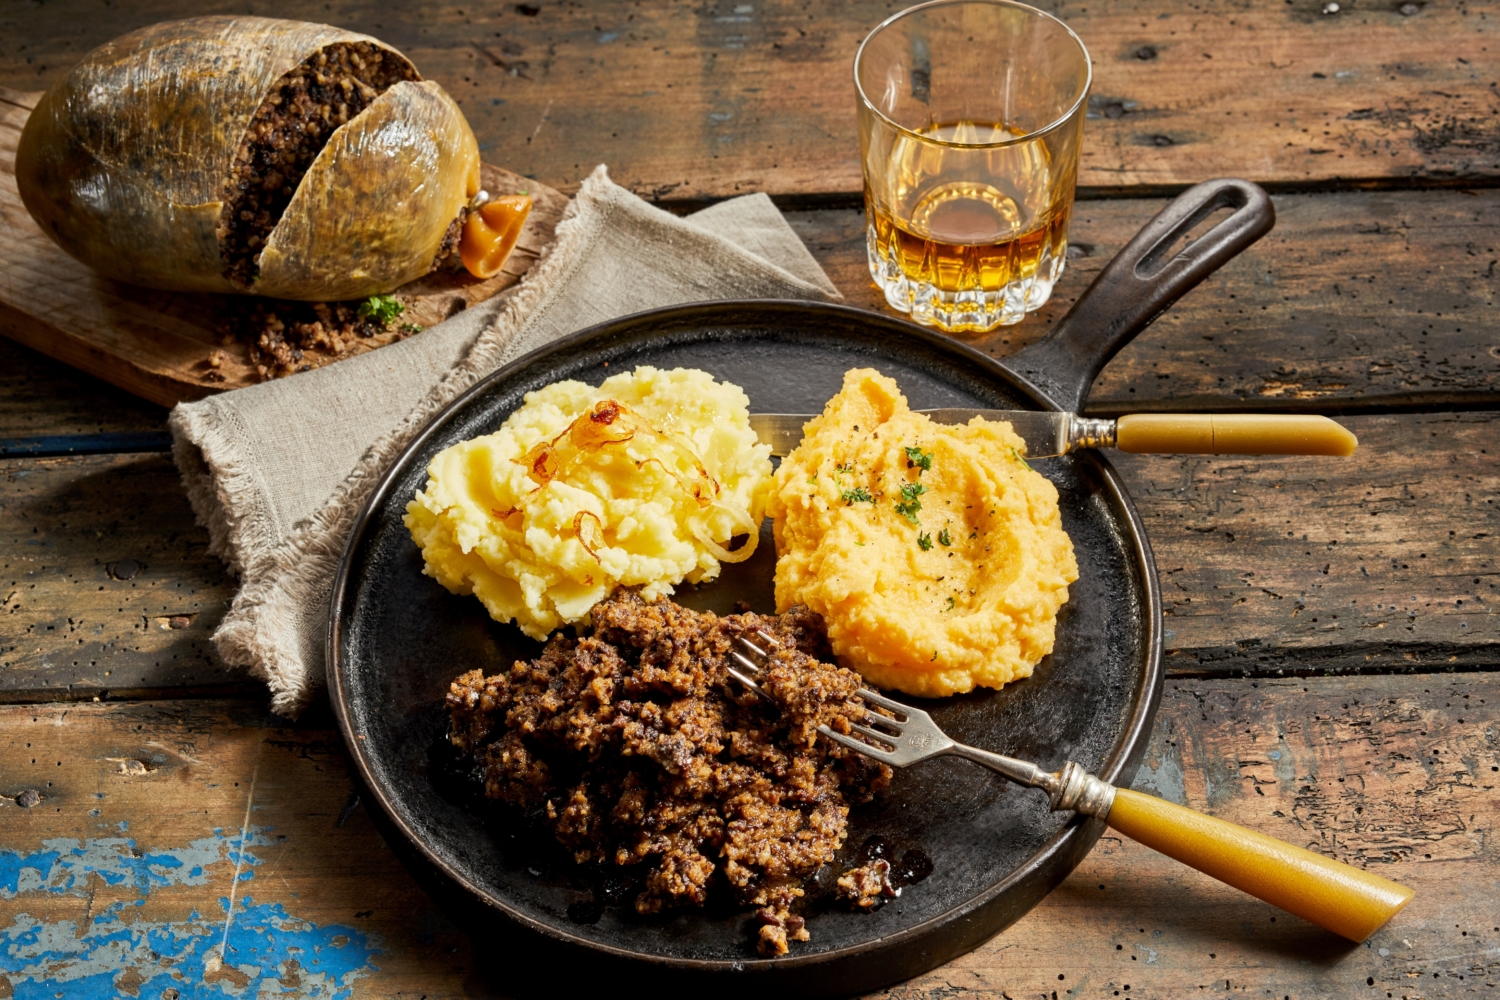 a traditional haggis meal, with whisky on the side